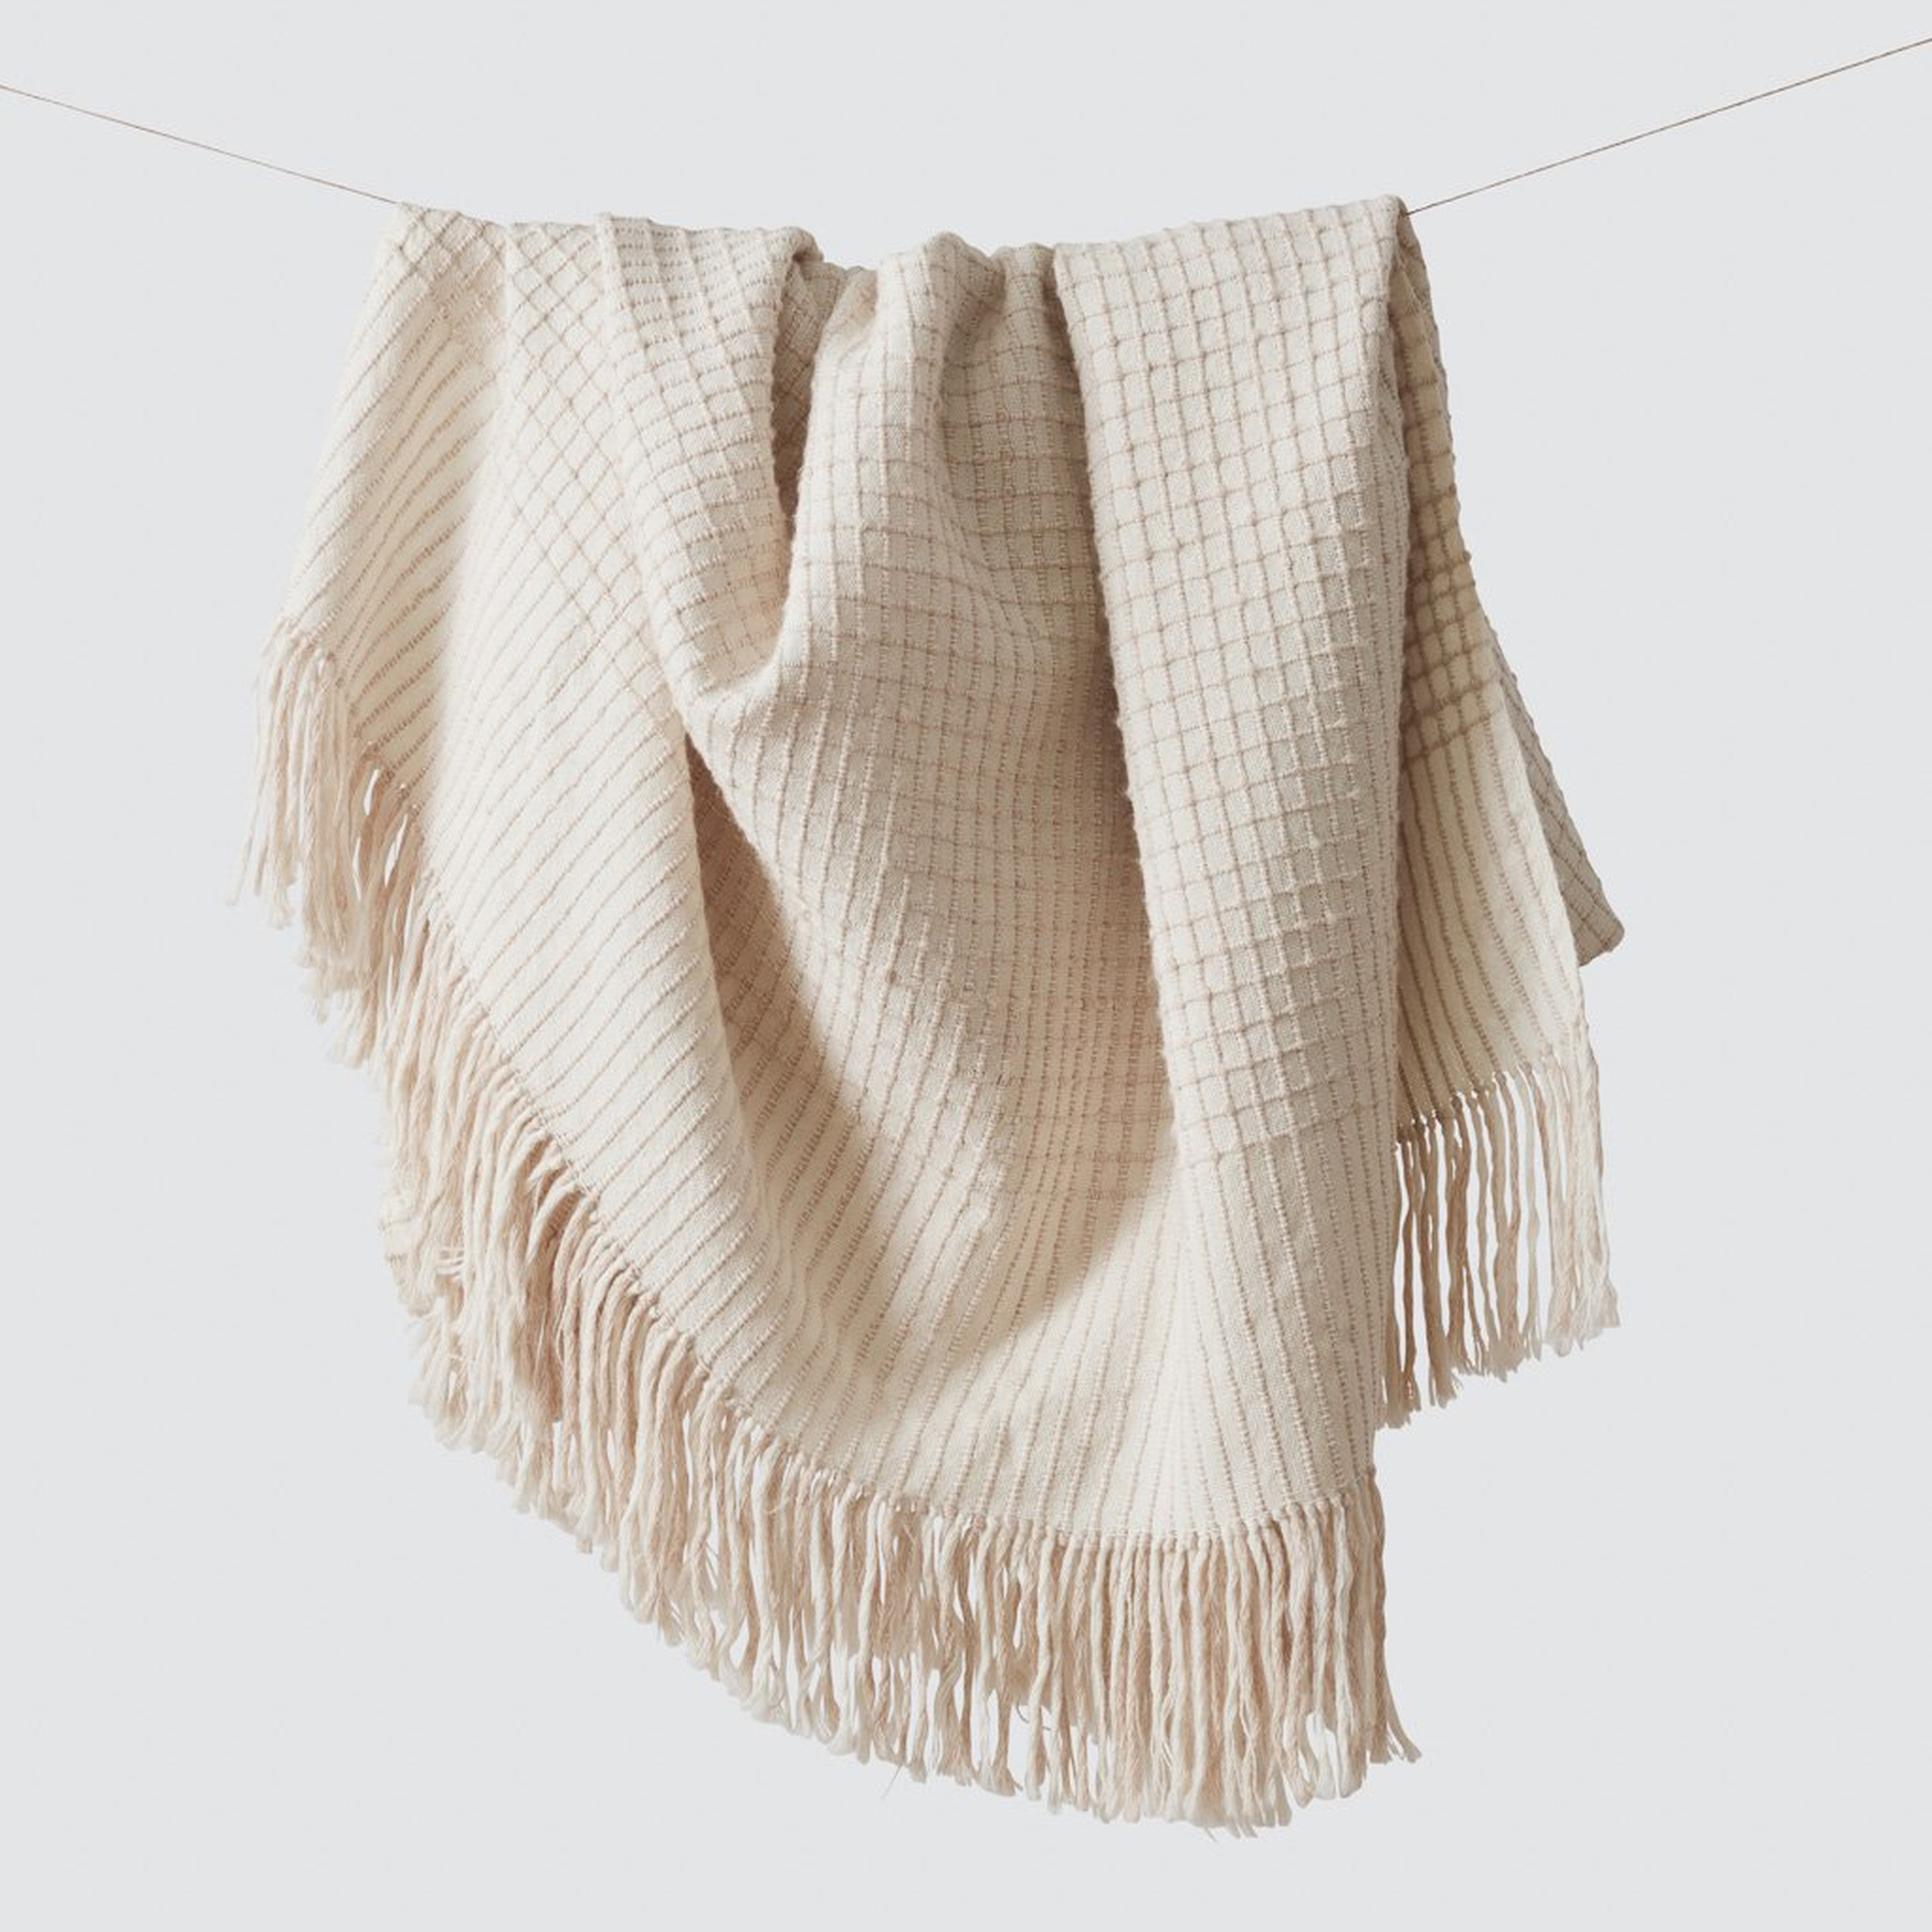 La Leña Alpaca Throw - Sand By The Citizenry - The Citizenry